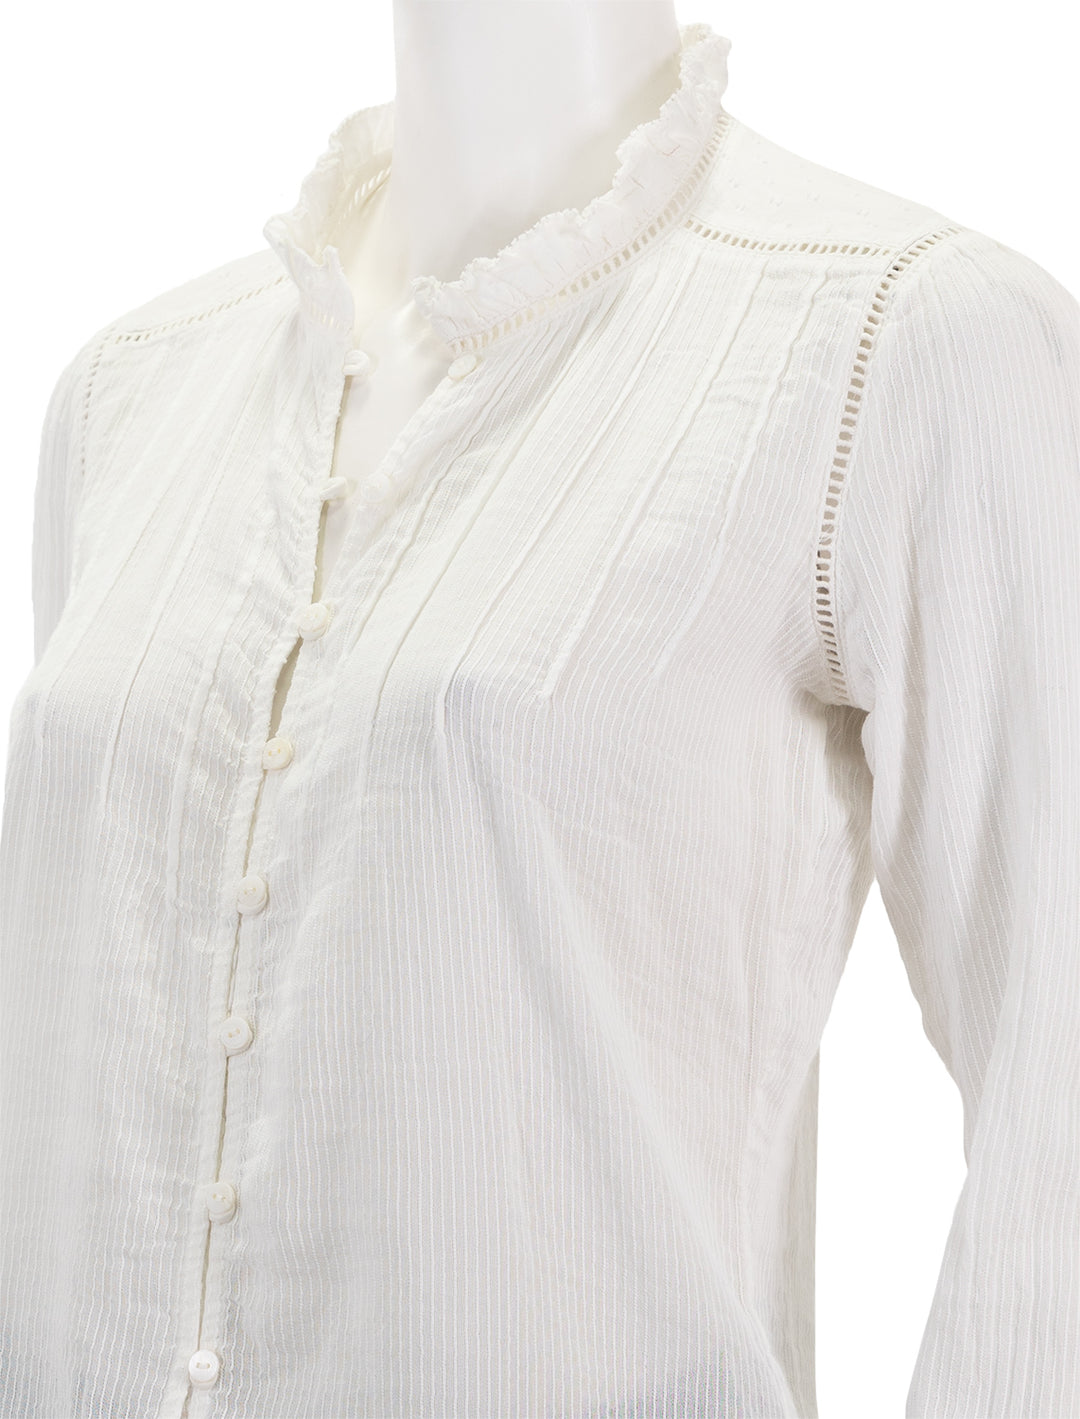 Close-up view of Faherty's willa top in white.